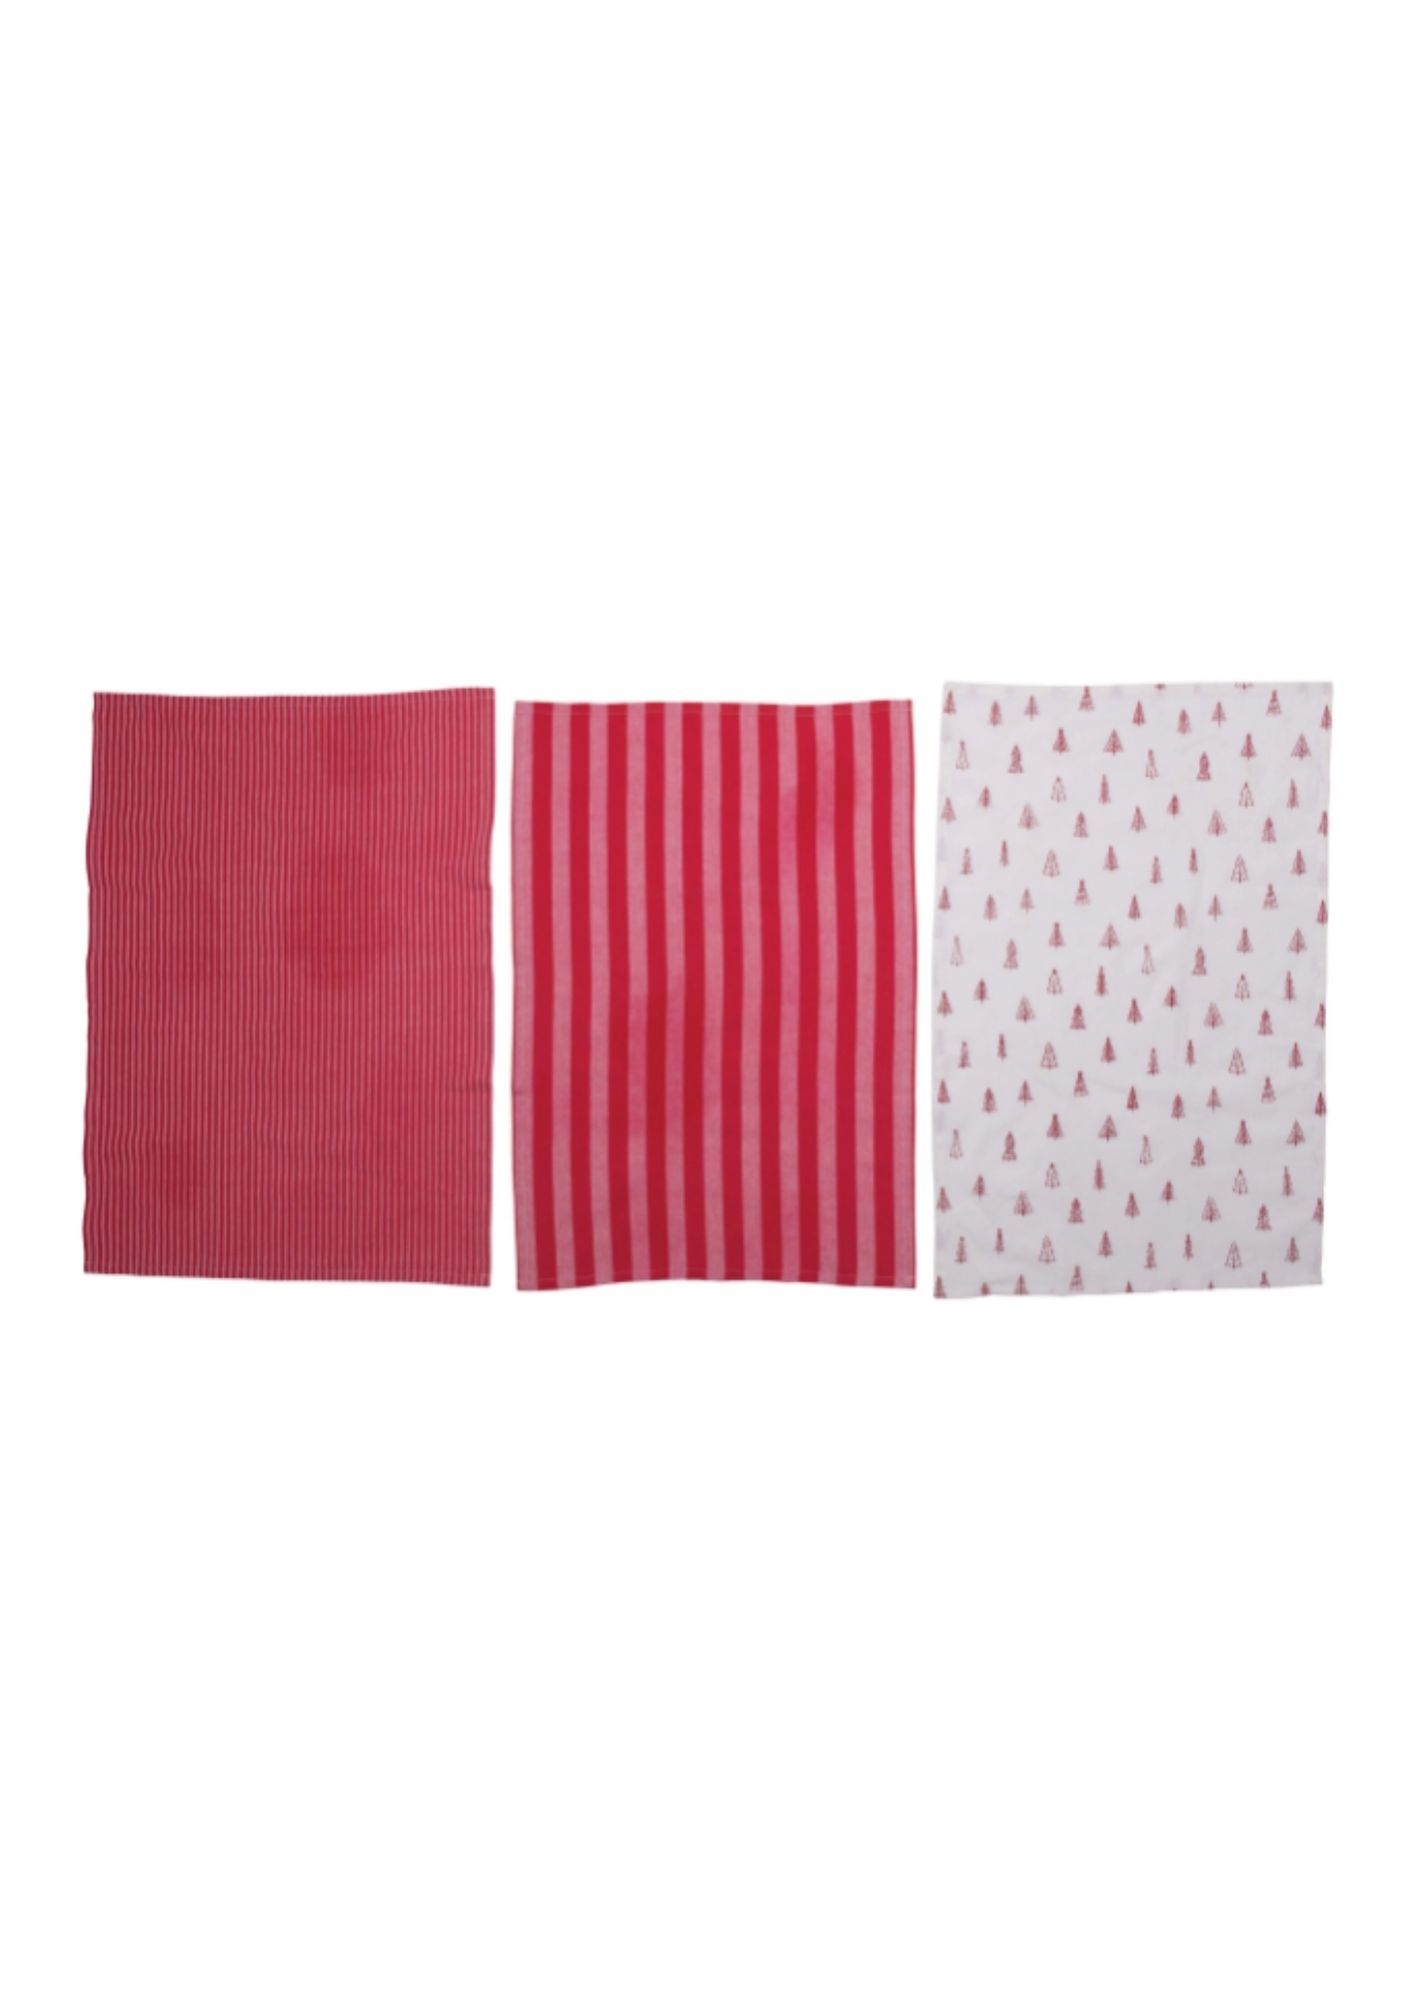 Winter Print Cotton Tea Towels - 3 Pack Home Creative Co-op red